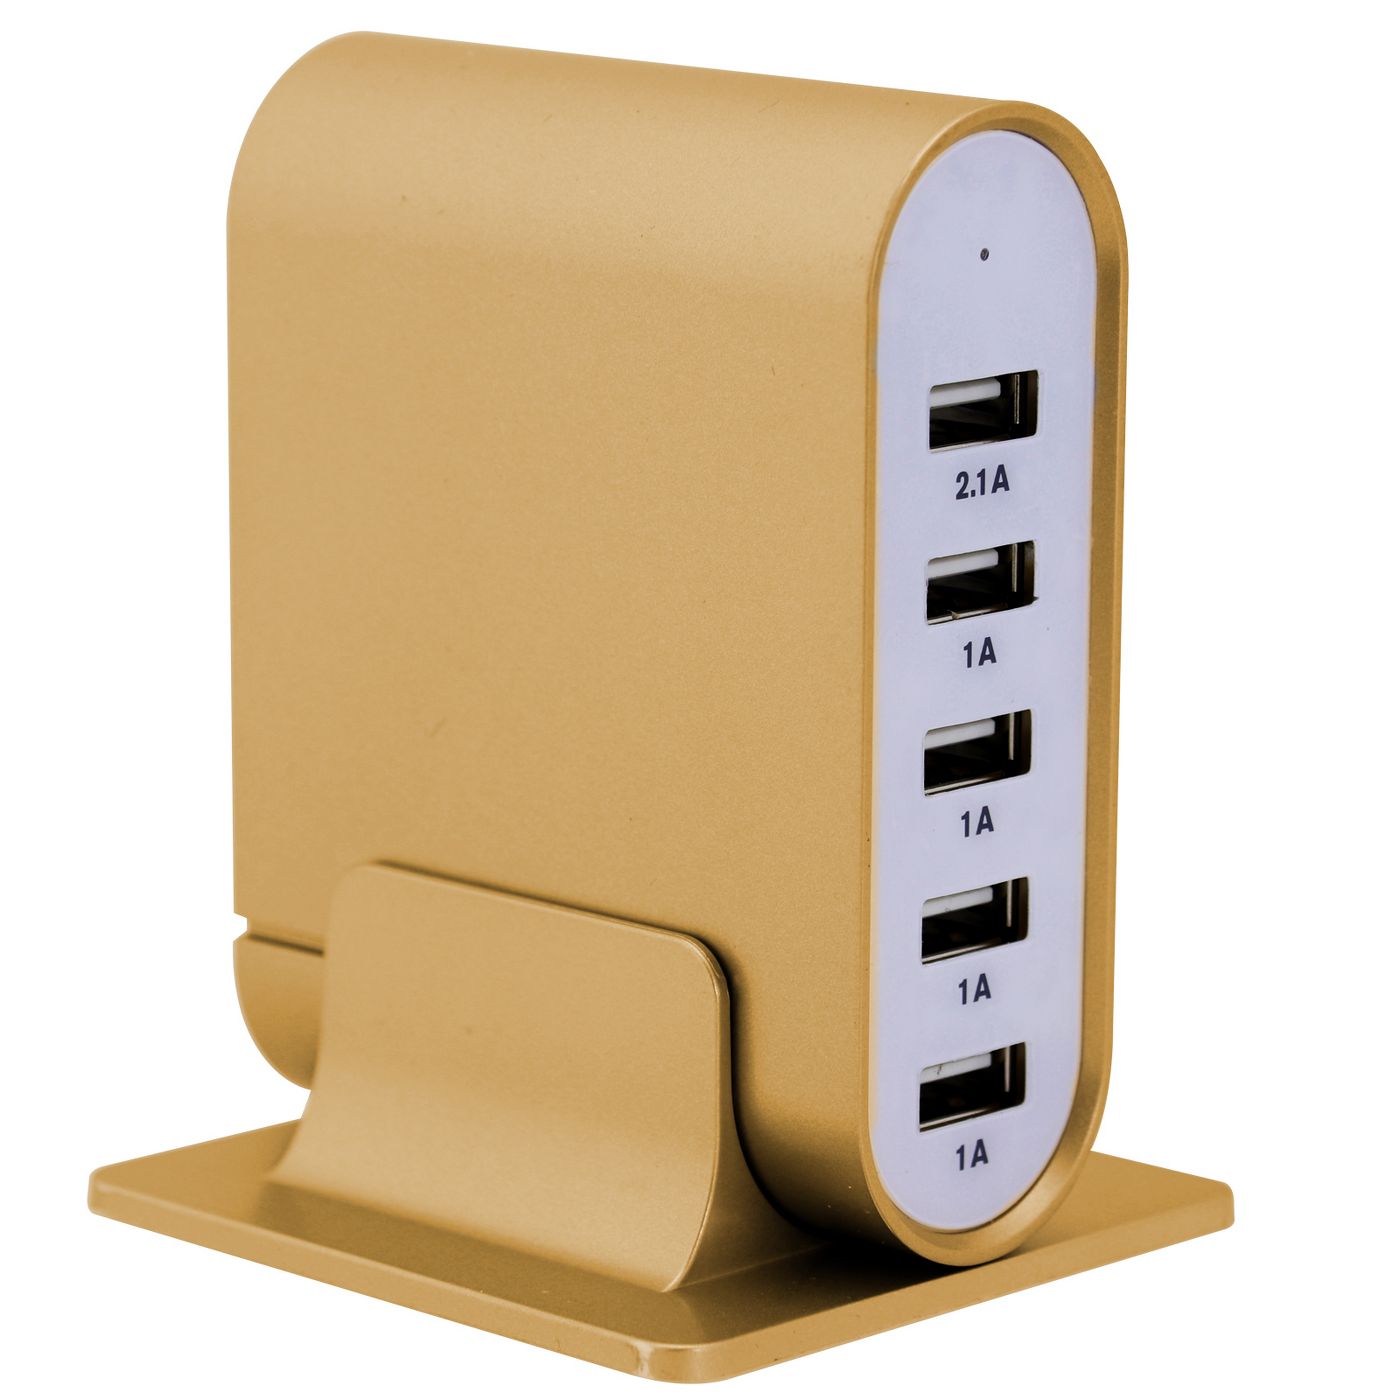 Cool home office gadgets: A small USB tower that will save you from climbing on the floor to find an outlet.